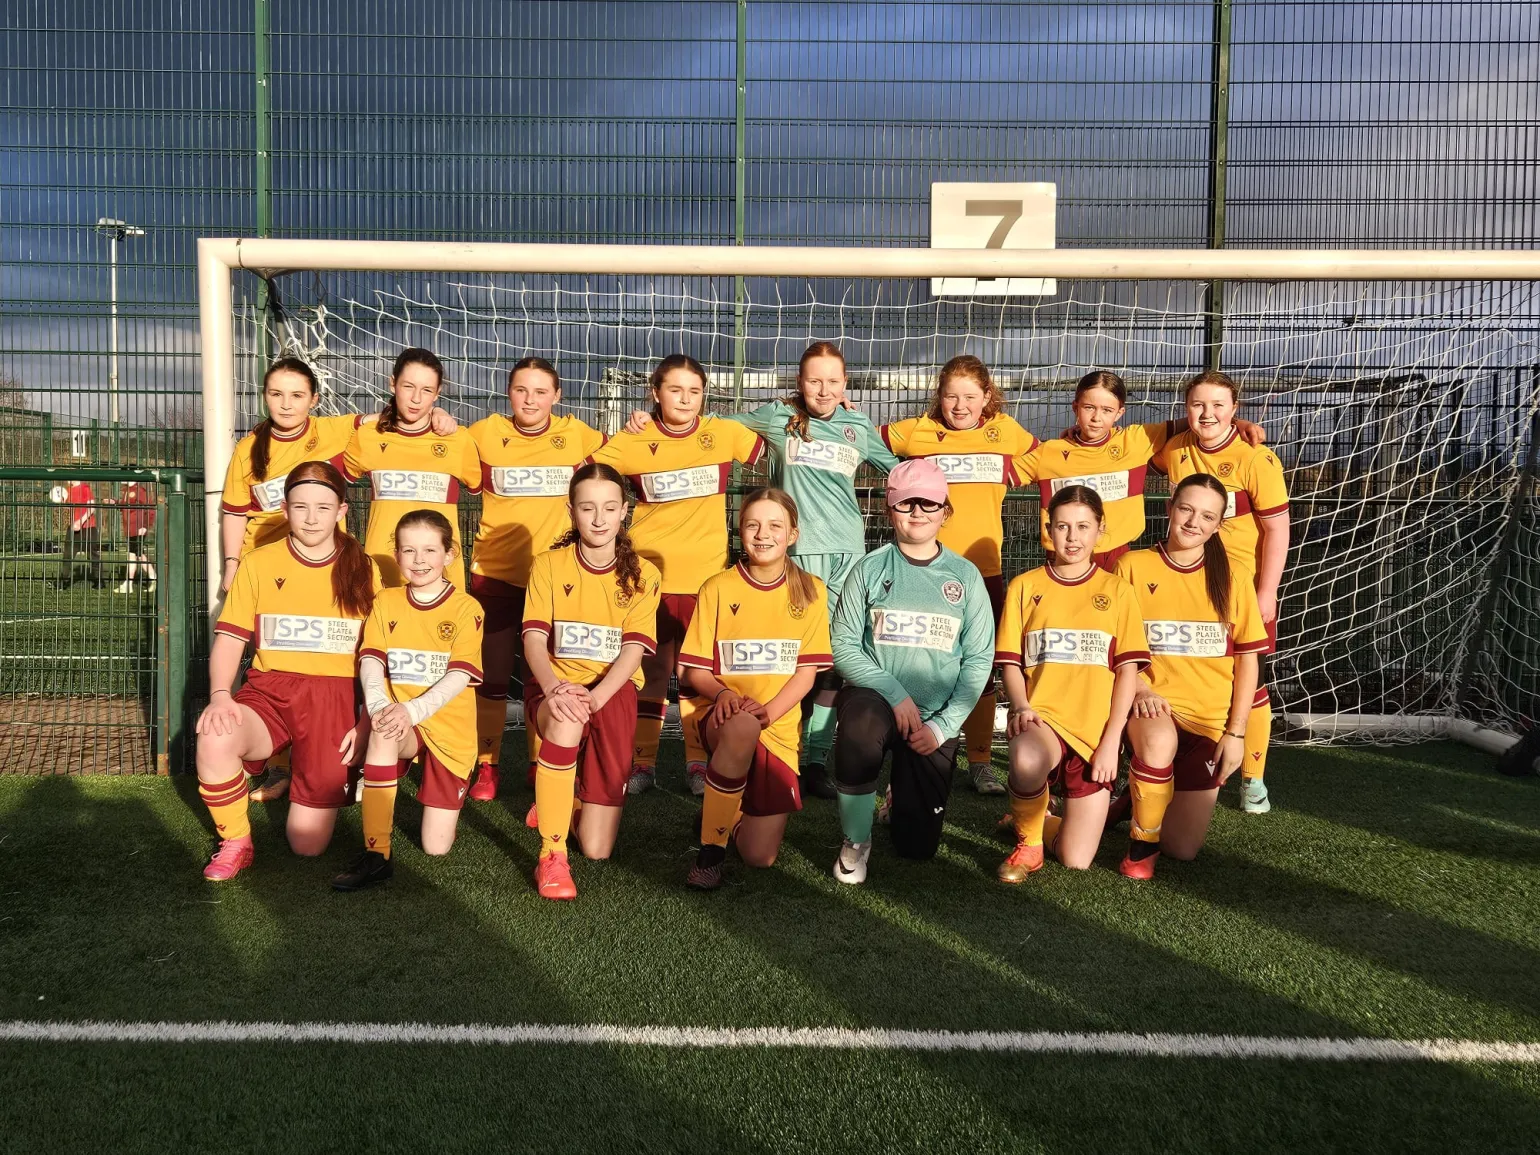 As the 2024 season kicks off, SPS is delighted to continue our sponsorship of Motherwell Football Club's under-14 girls academy team. This marks the second year we have proudly supported these talented young athletes who epitomises the spirit of the region.

Named "The Girls of Steel", the U14 squad take to the pitch this year with new training and matchday kit featuring the SPS logo. Our renewed sponsorship enables the purchase of the latest teamwear, underscoring our commitment to investing in the future of women's football.

This partnership symbolises an enduring bond between industry and community. As the squad pursues excellence this season, they do so with the backing of SPS and the entire Motherwell community. We can't wait to cheer on the “Girls of Steel”!
